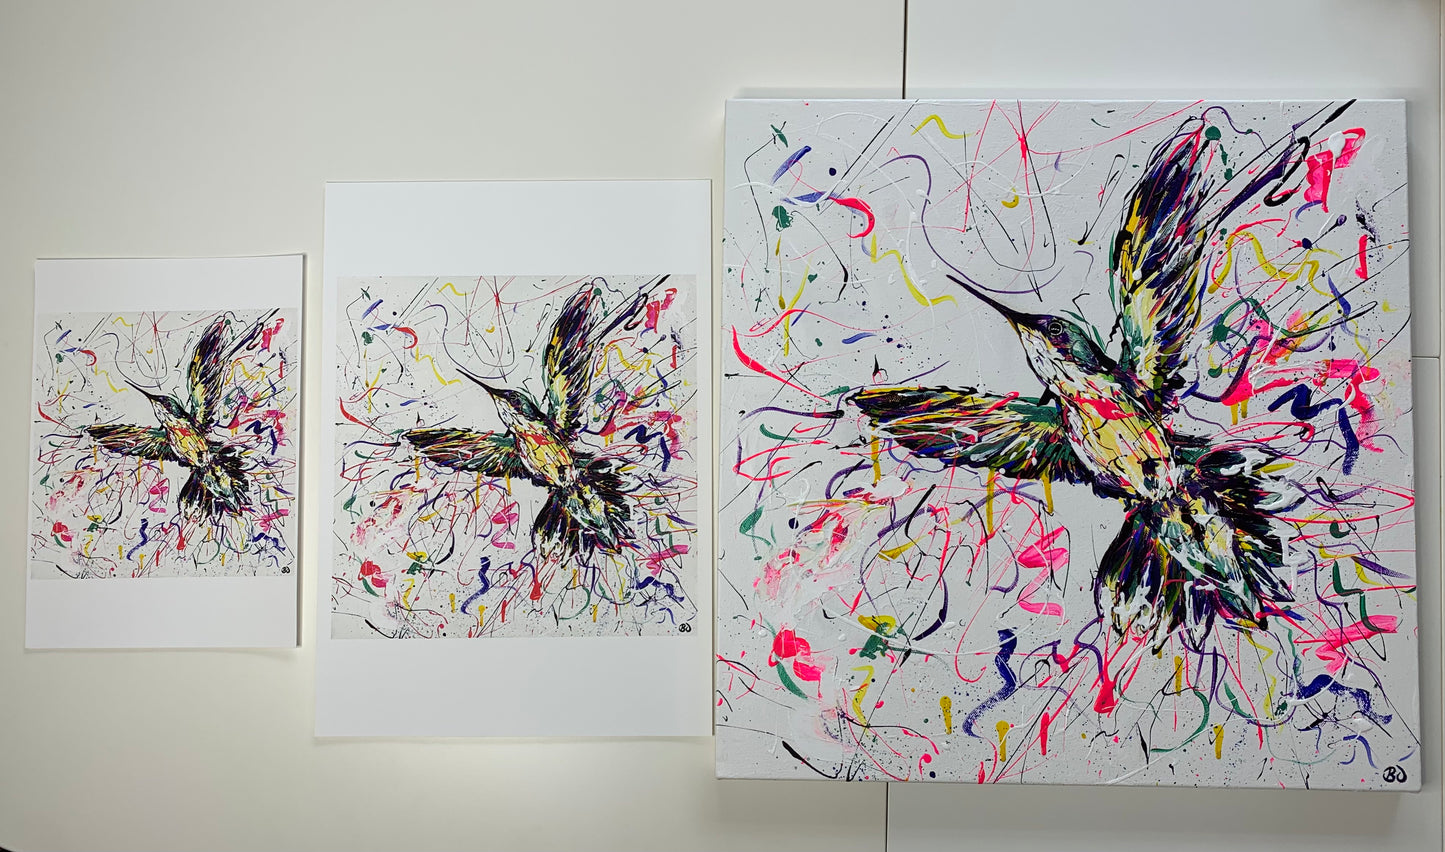 A4 (20.5 x 20.5cm), A3 (27.5 x 27.5cm) prints of hummingbird ("Explosion") next to the original which is size 50 x 50cm.